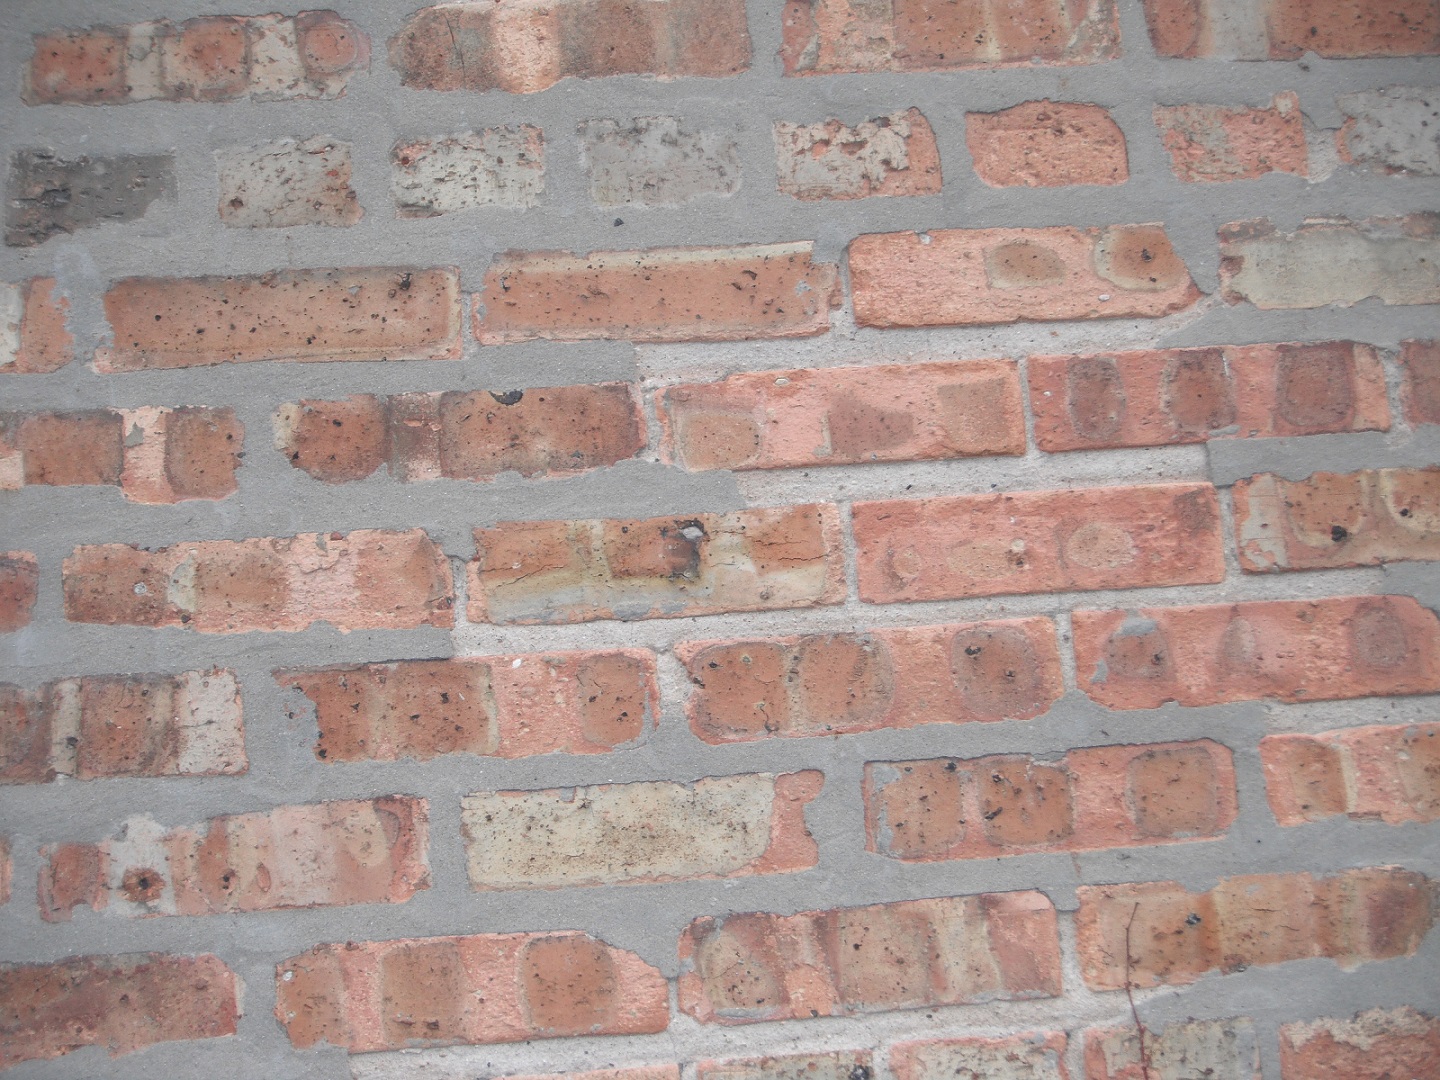 Poorly installed tuckpointing on the brick joints it is flaking off. "New Lenox Home Inspection"